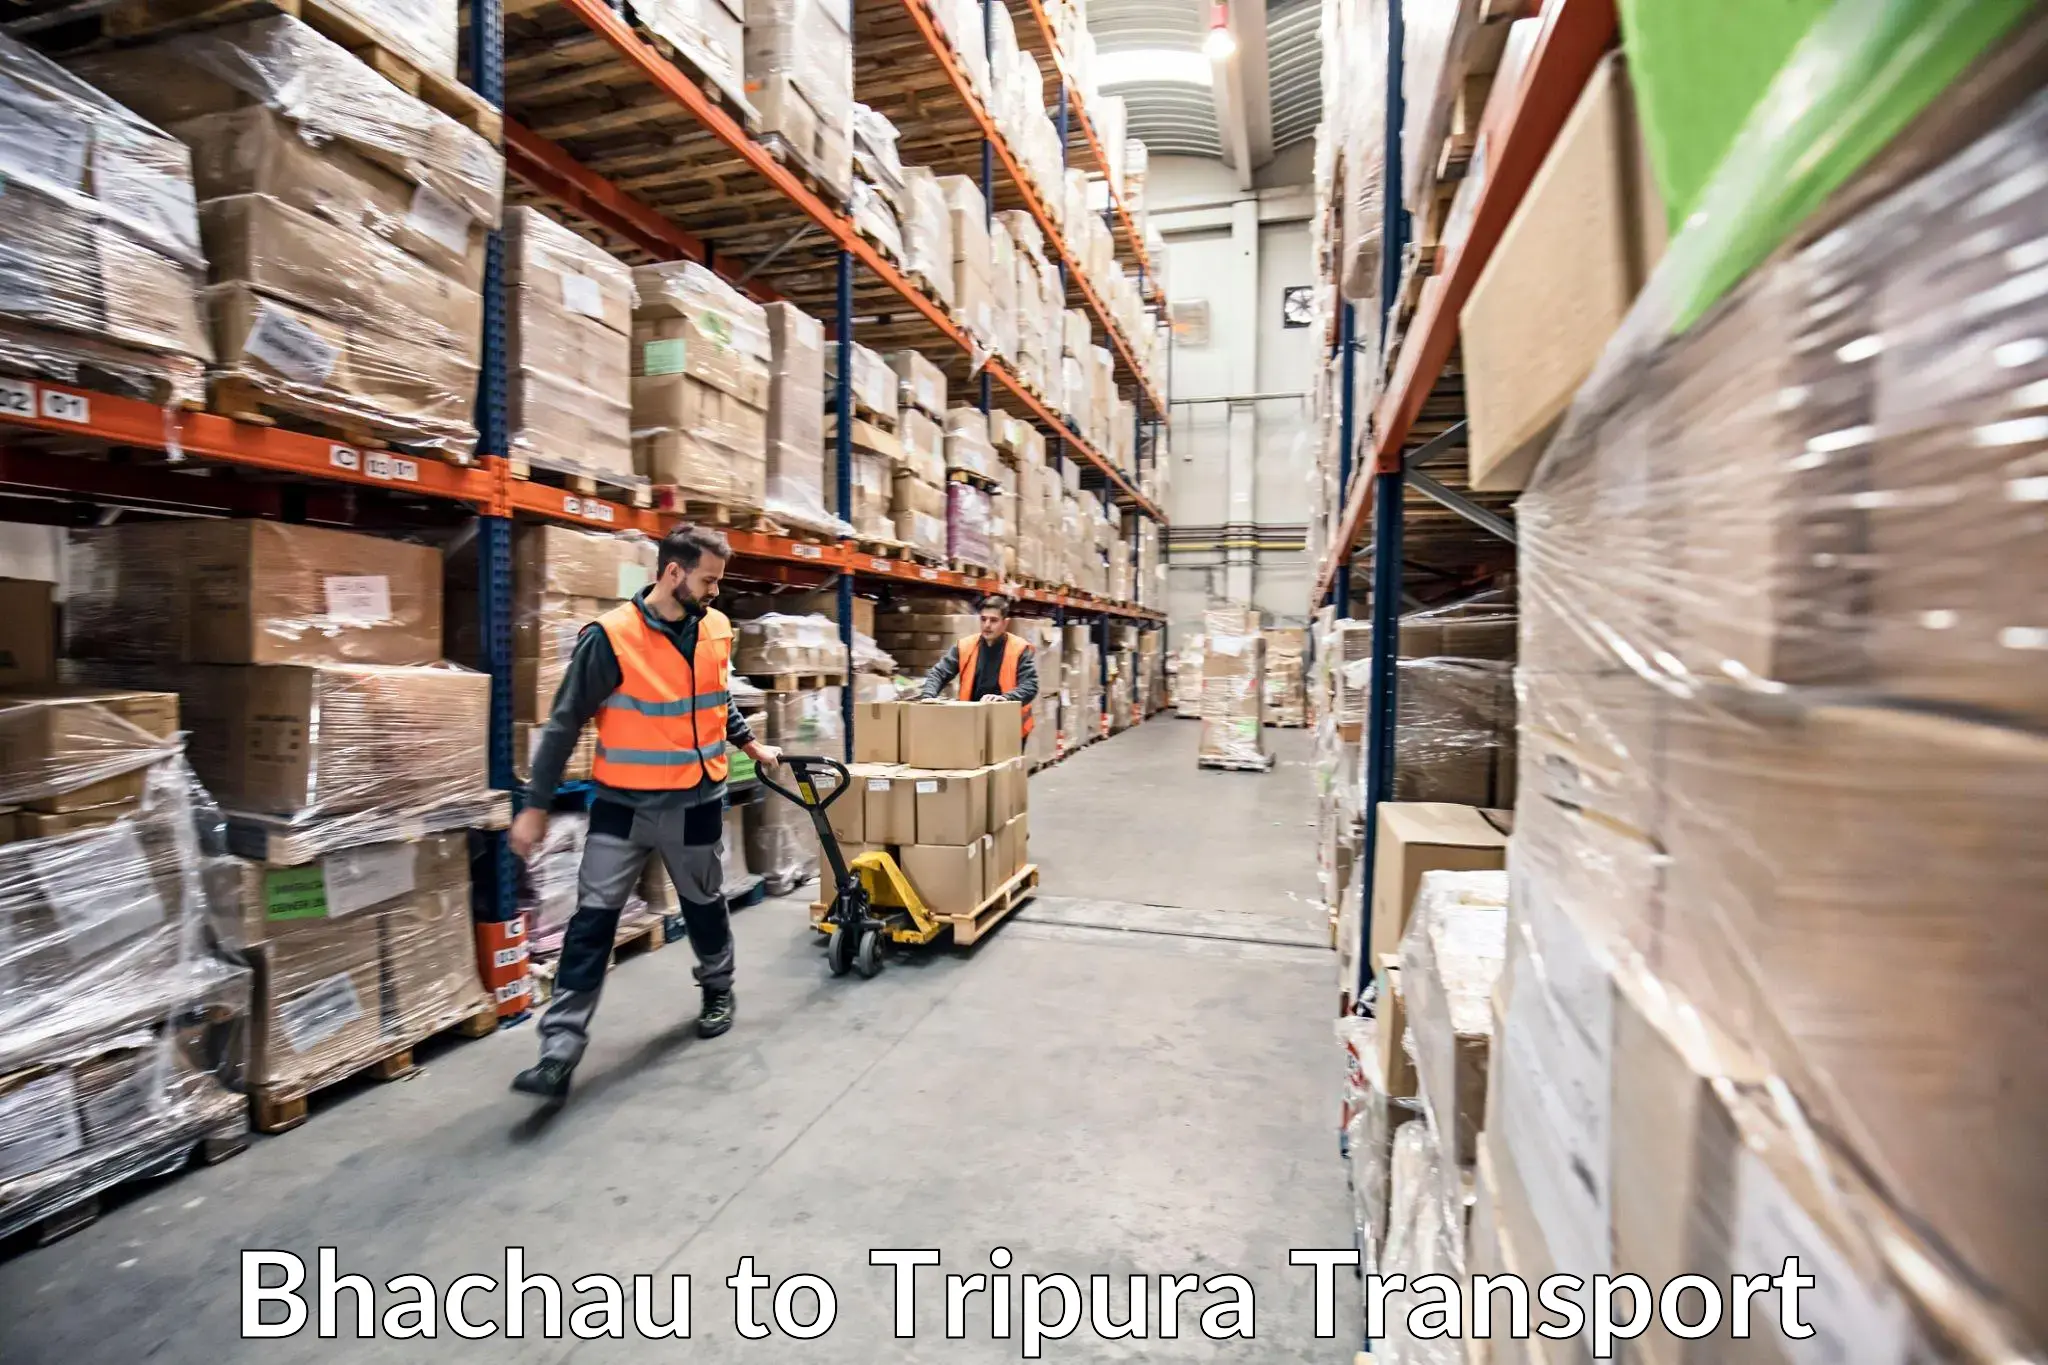 Truck transport companies in India Bhachau to Dhalai